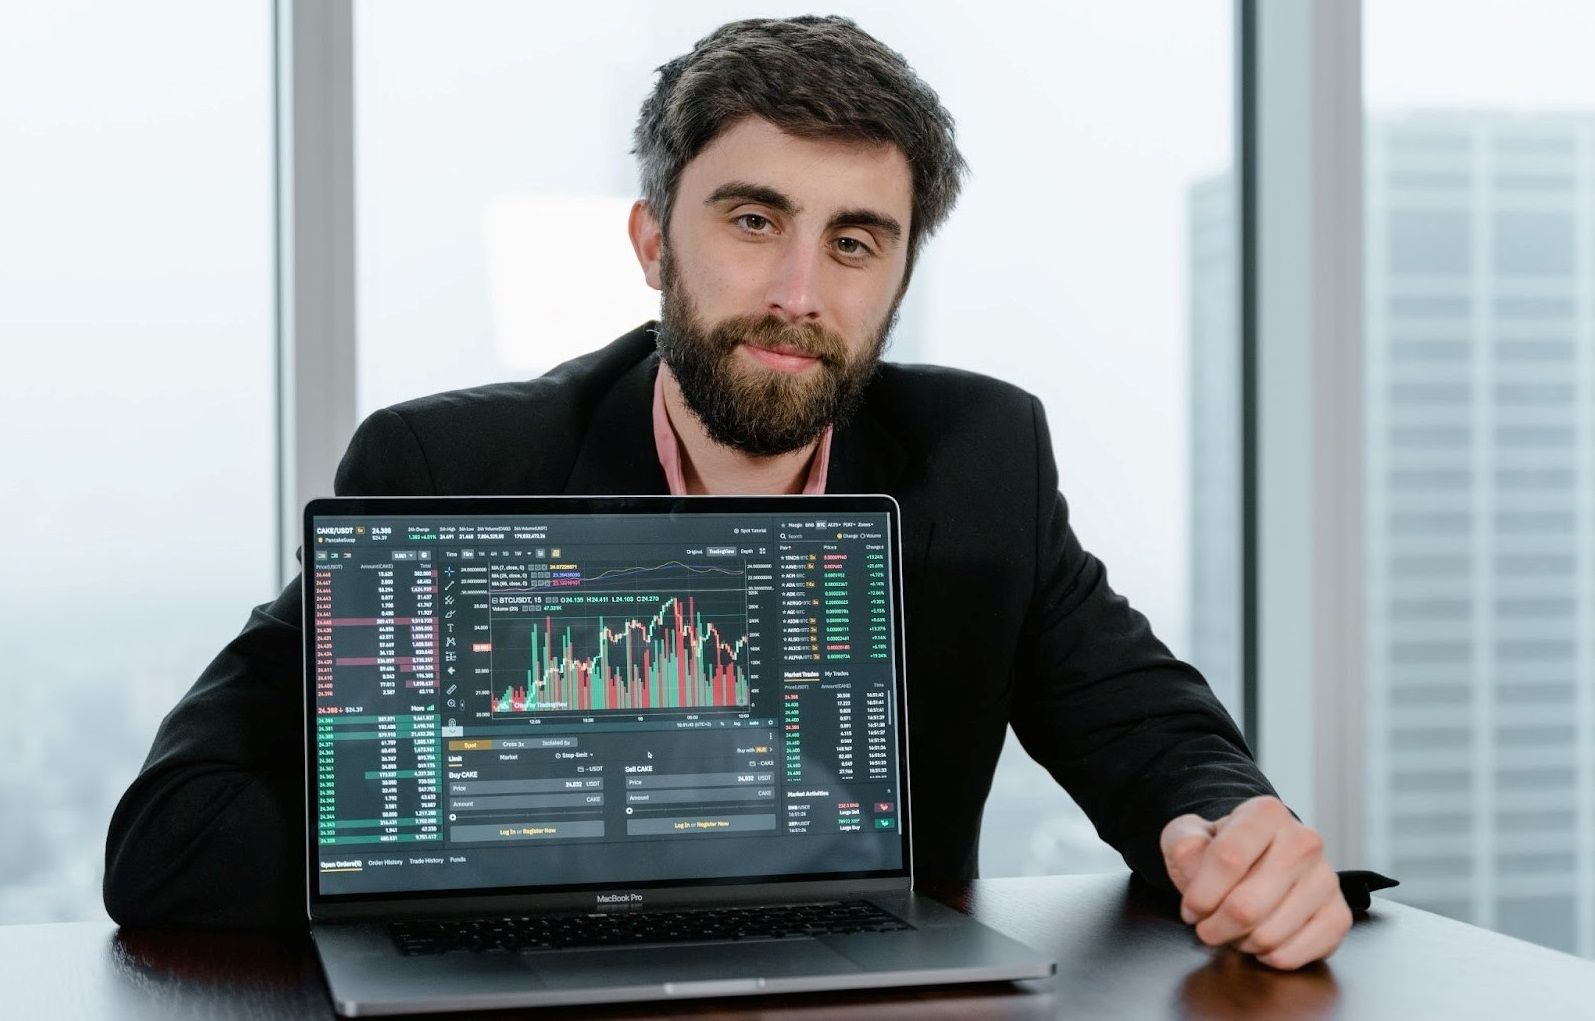 A man sitting behind a laptop screen showing a cryptocurrency price graph.